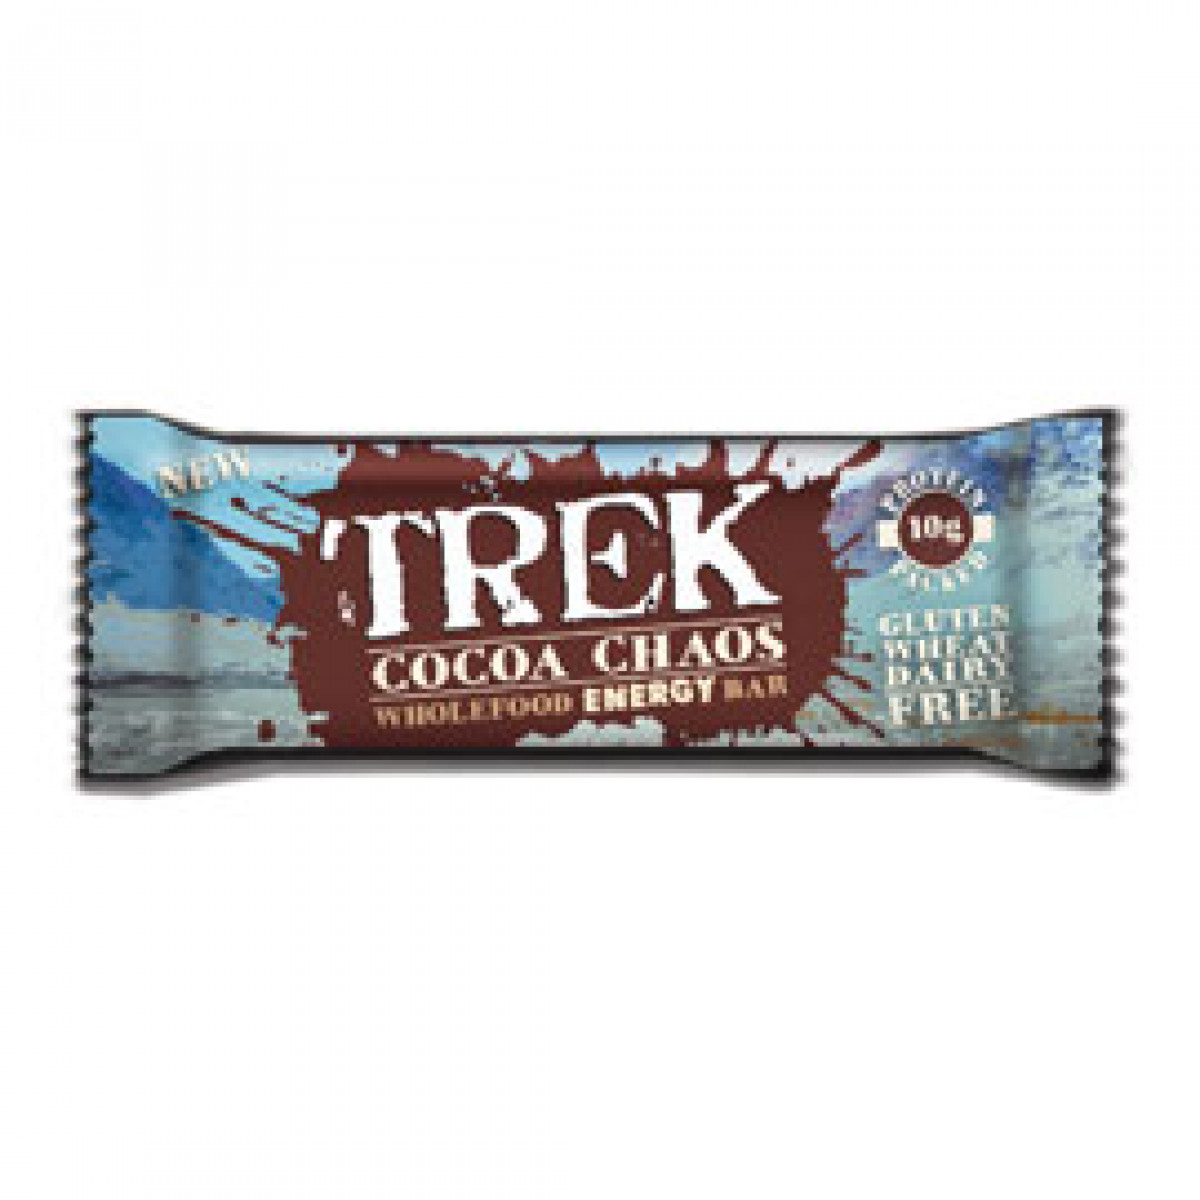 Product picture for Trek Cocoa Chaos